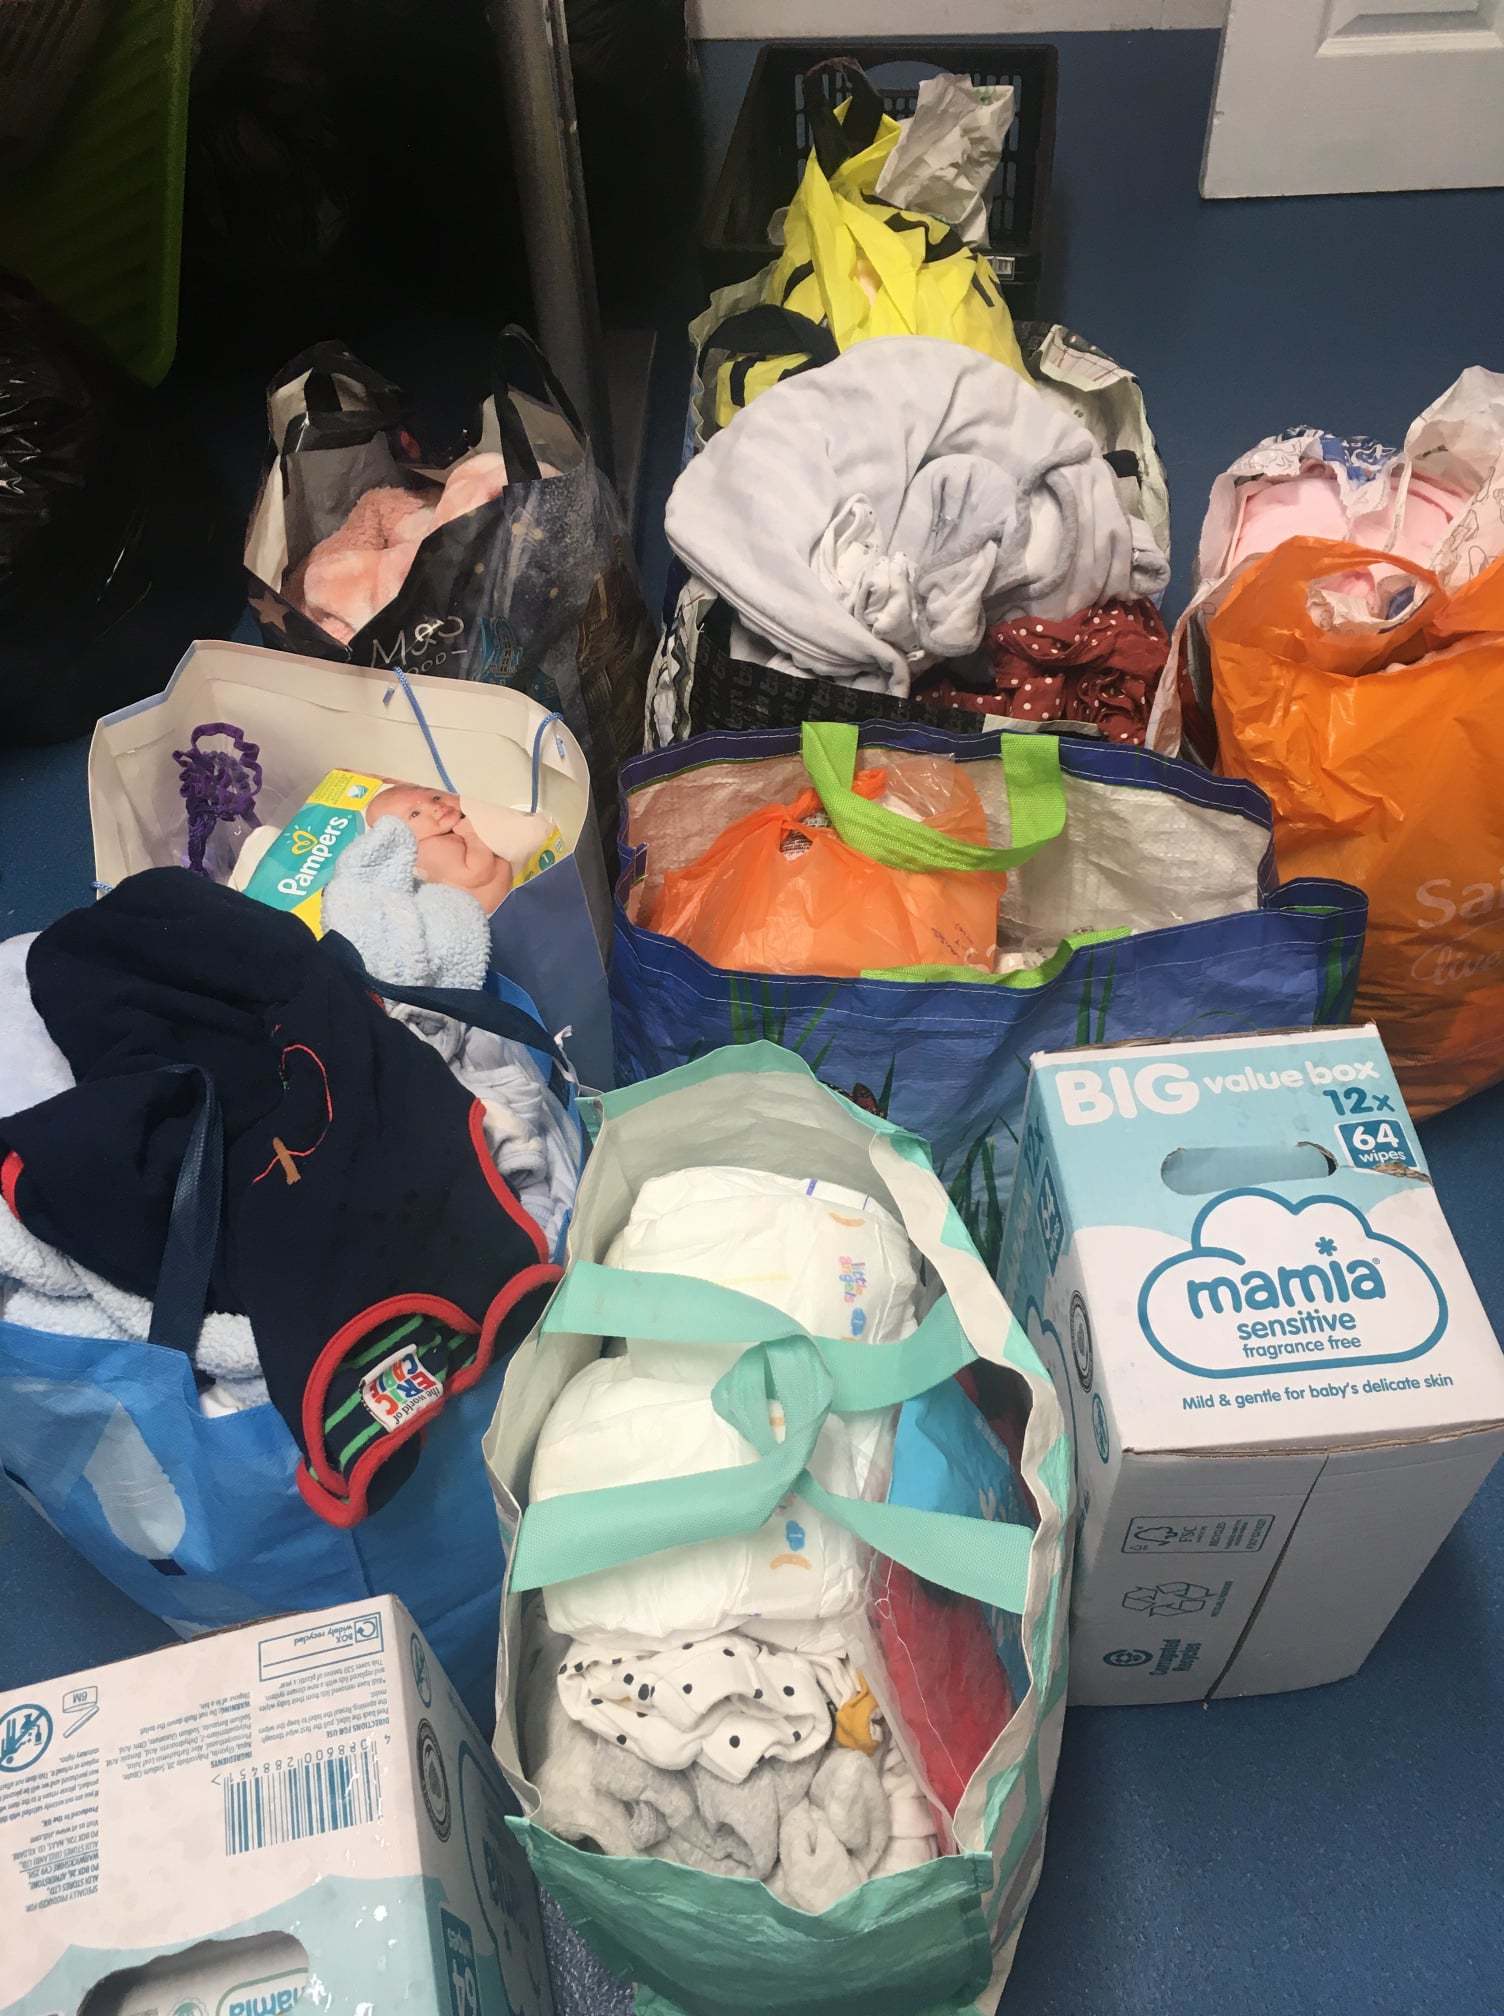 Bundles Baby Clothing Bank and Birth Support